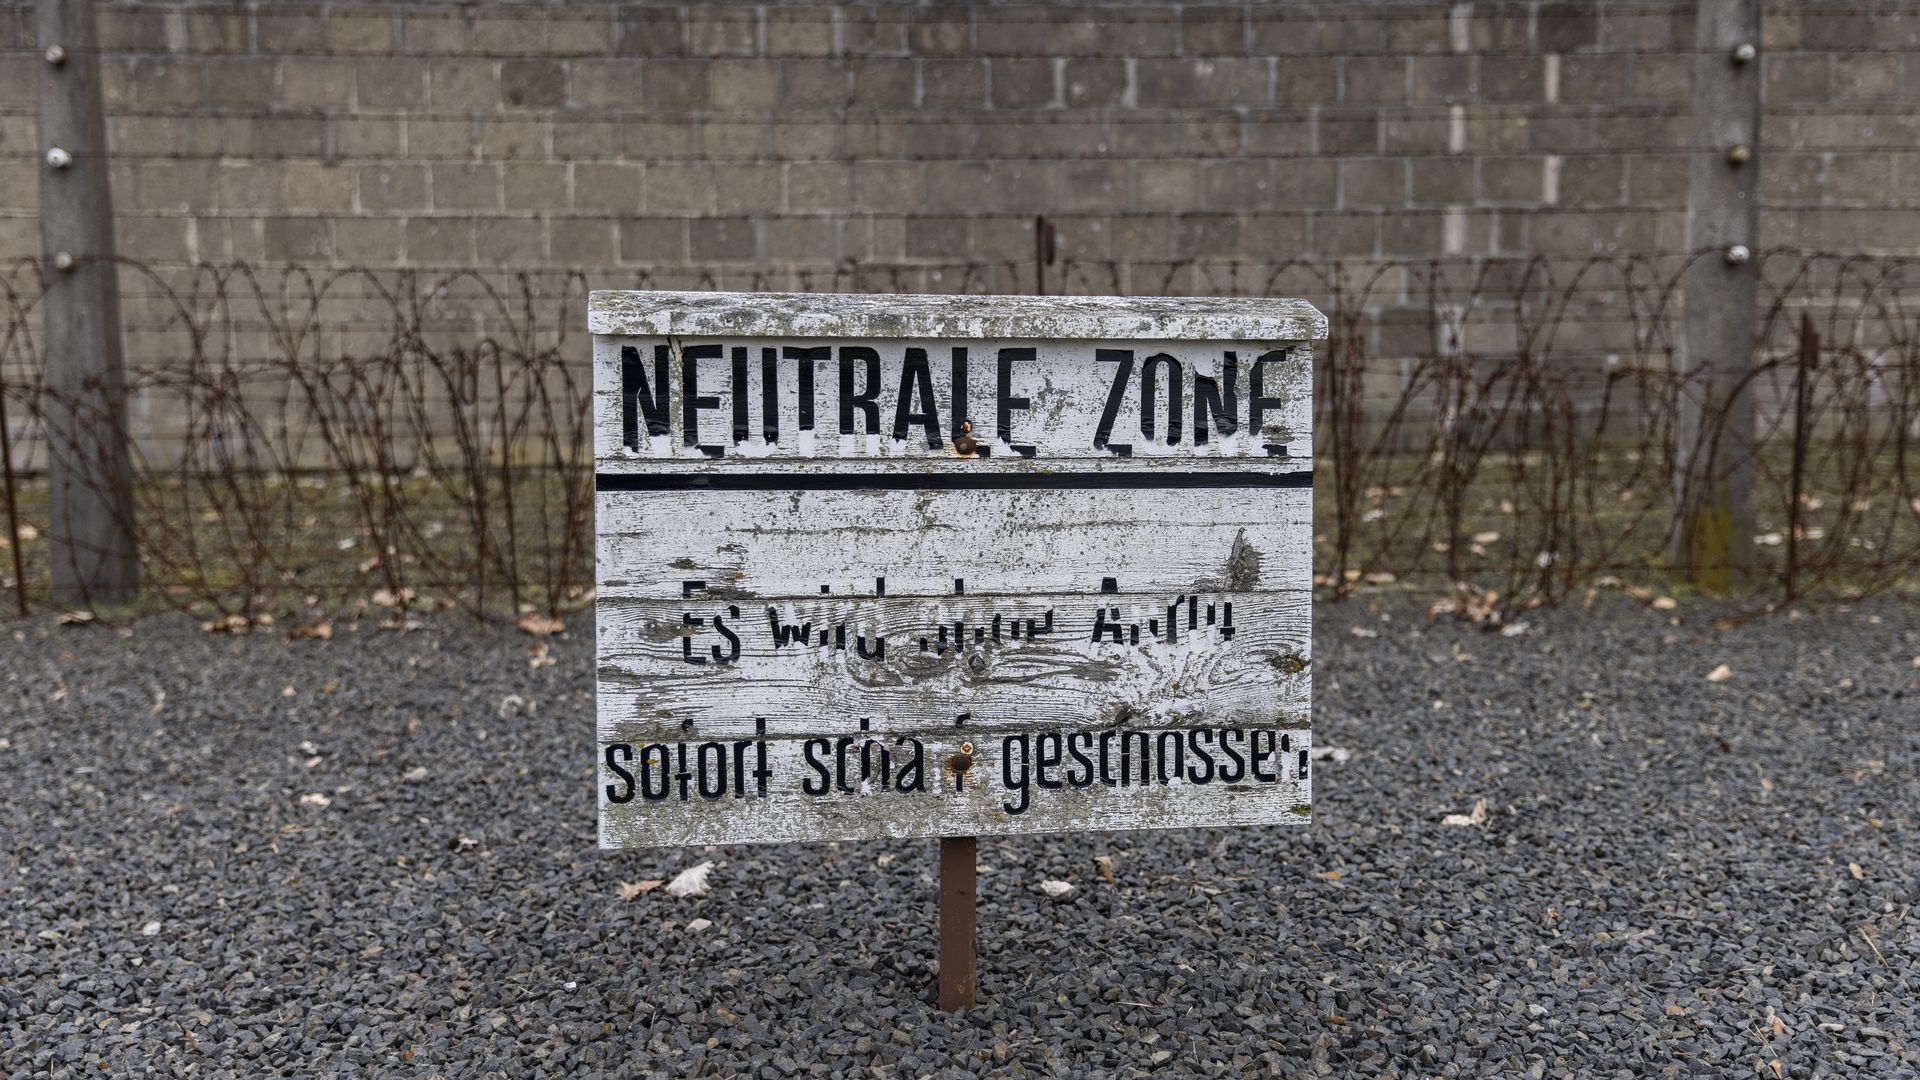 A fading banner reads "Neutral zone, it will be shot at without a warning" at the Sachsenhausen concentration camp memorial in Oranienburg, Germany.